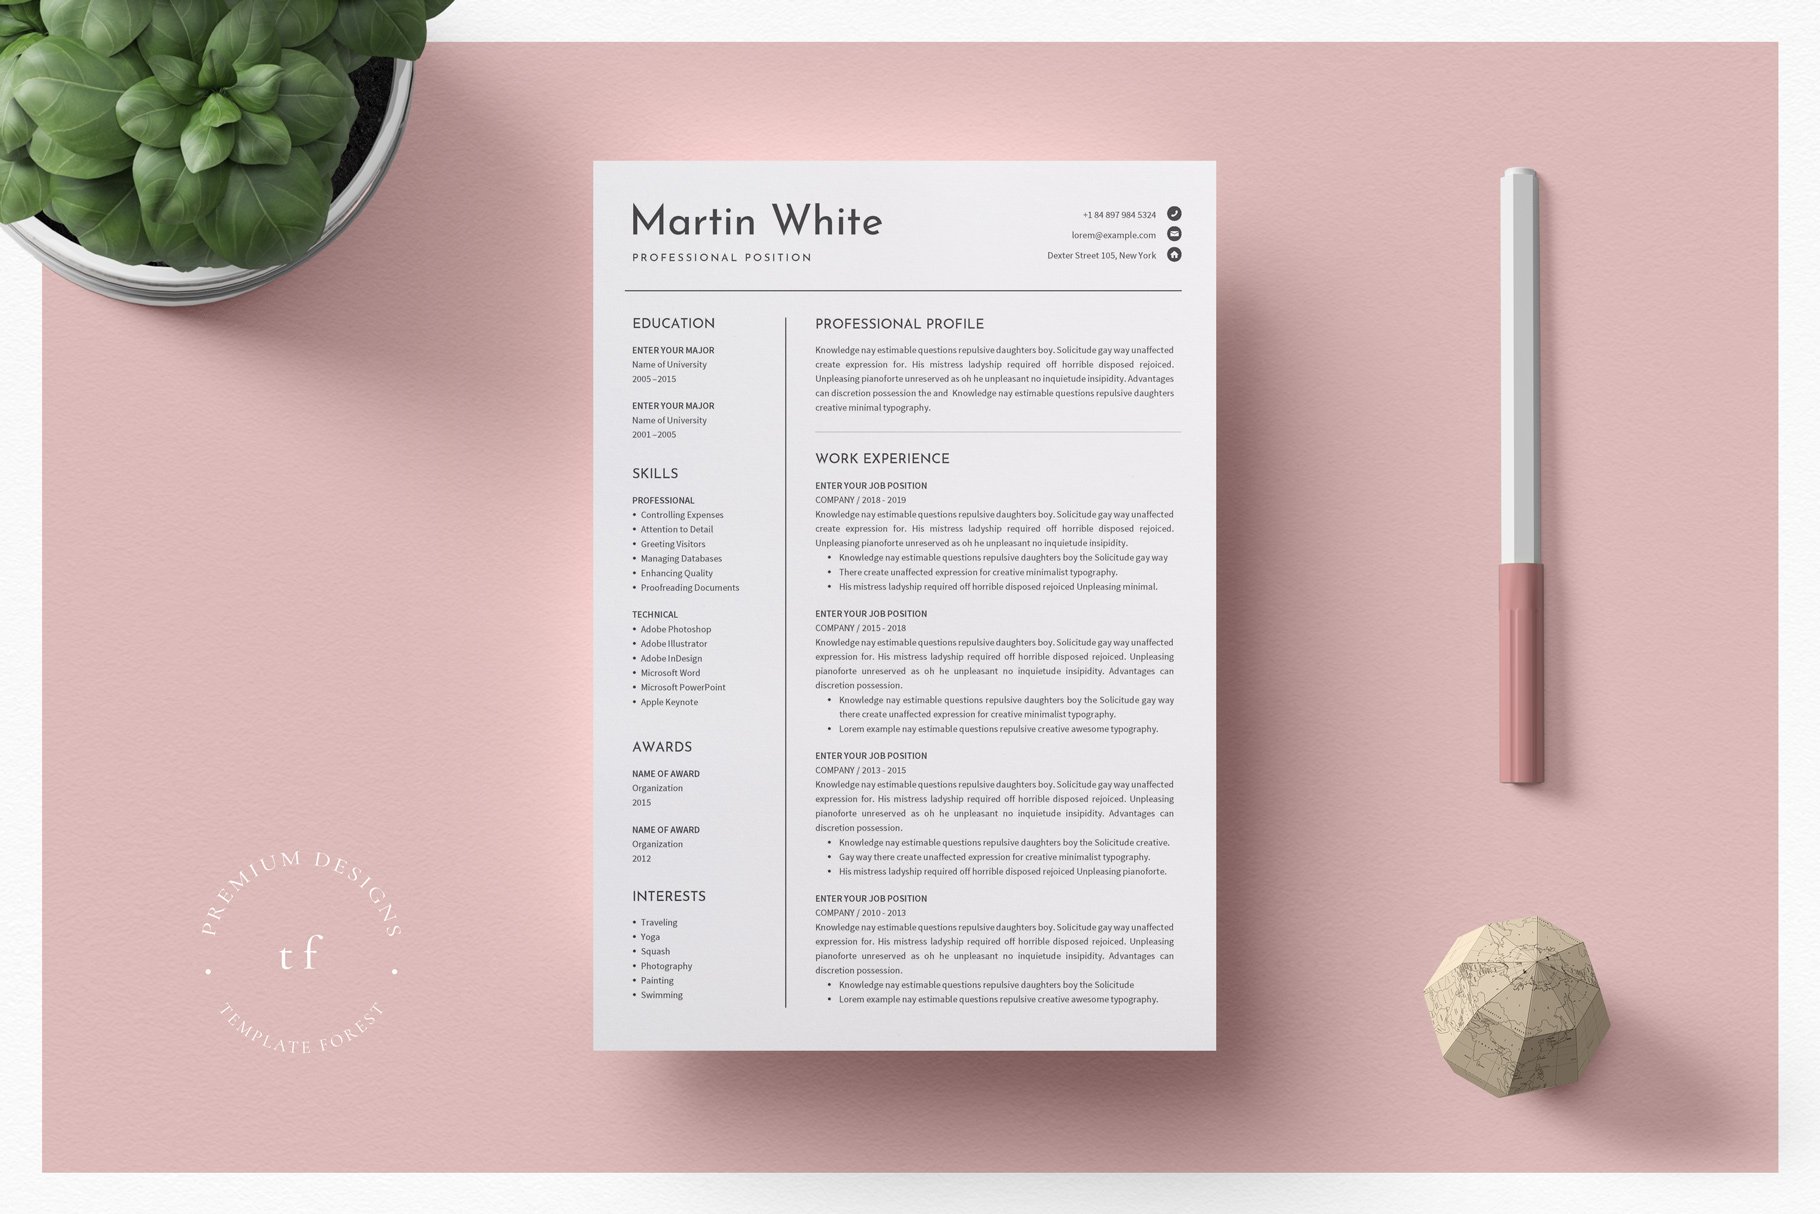 Clean Word Resume & Cover Letter cover image.